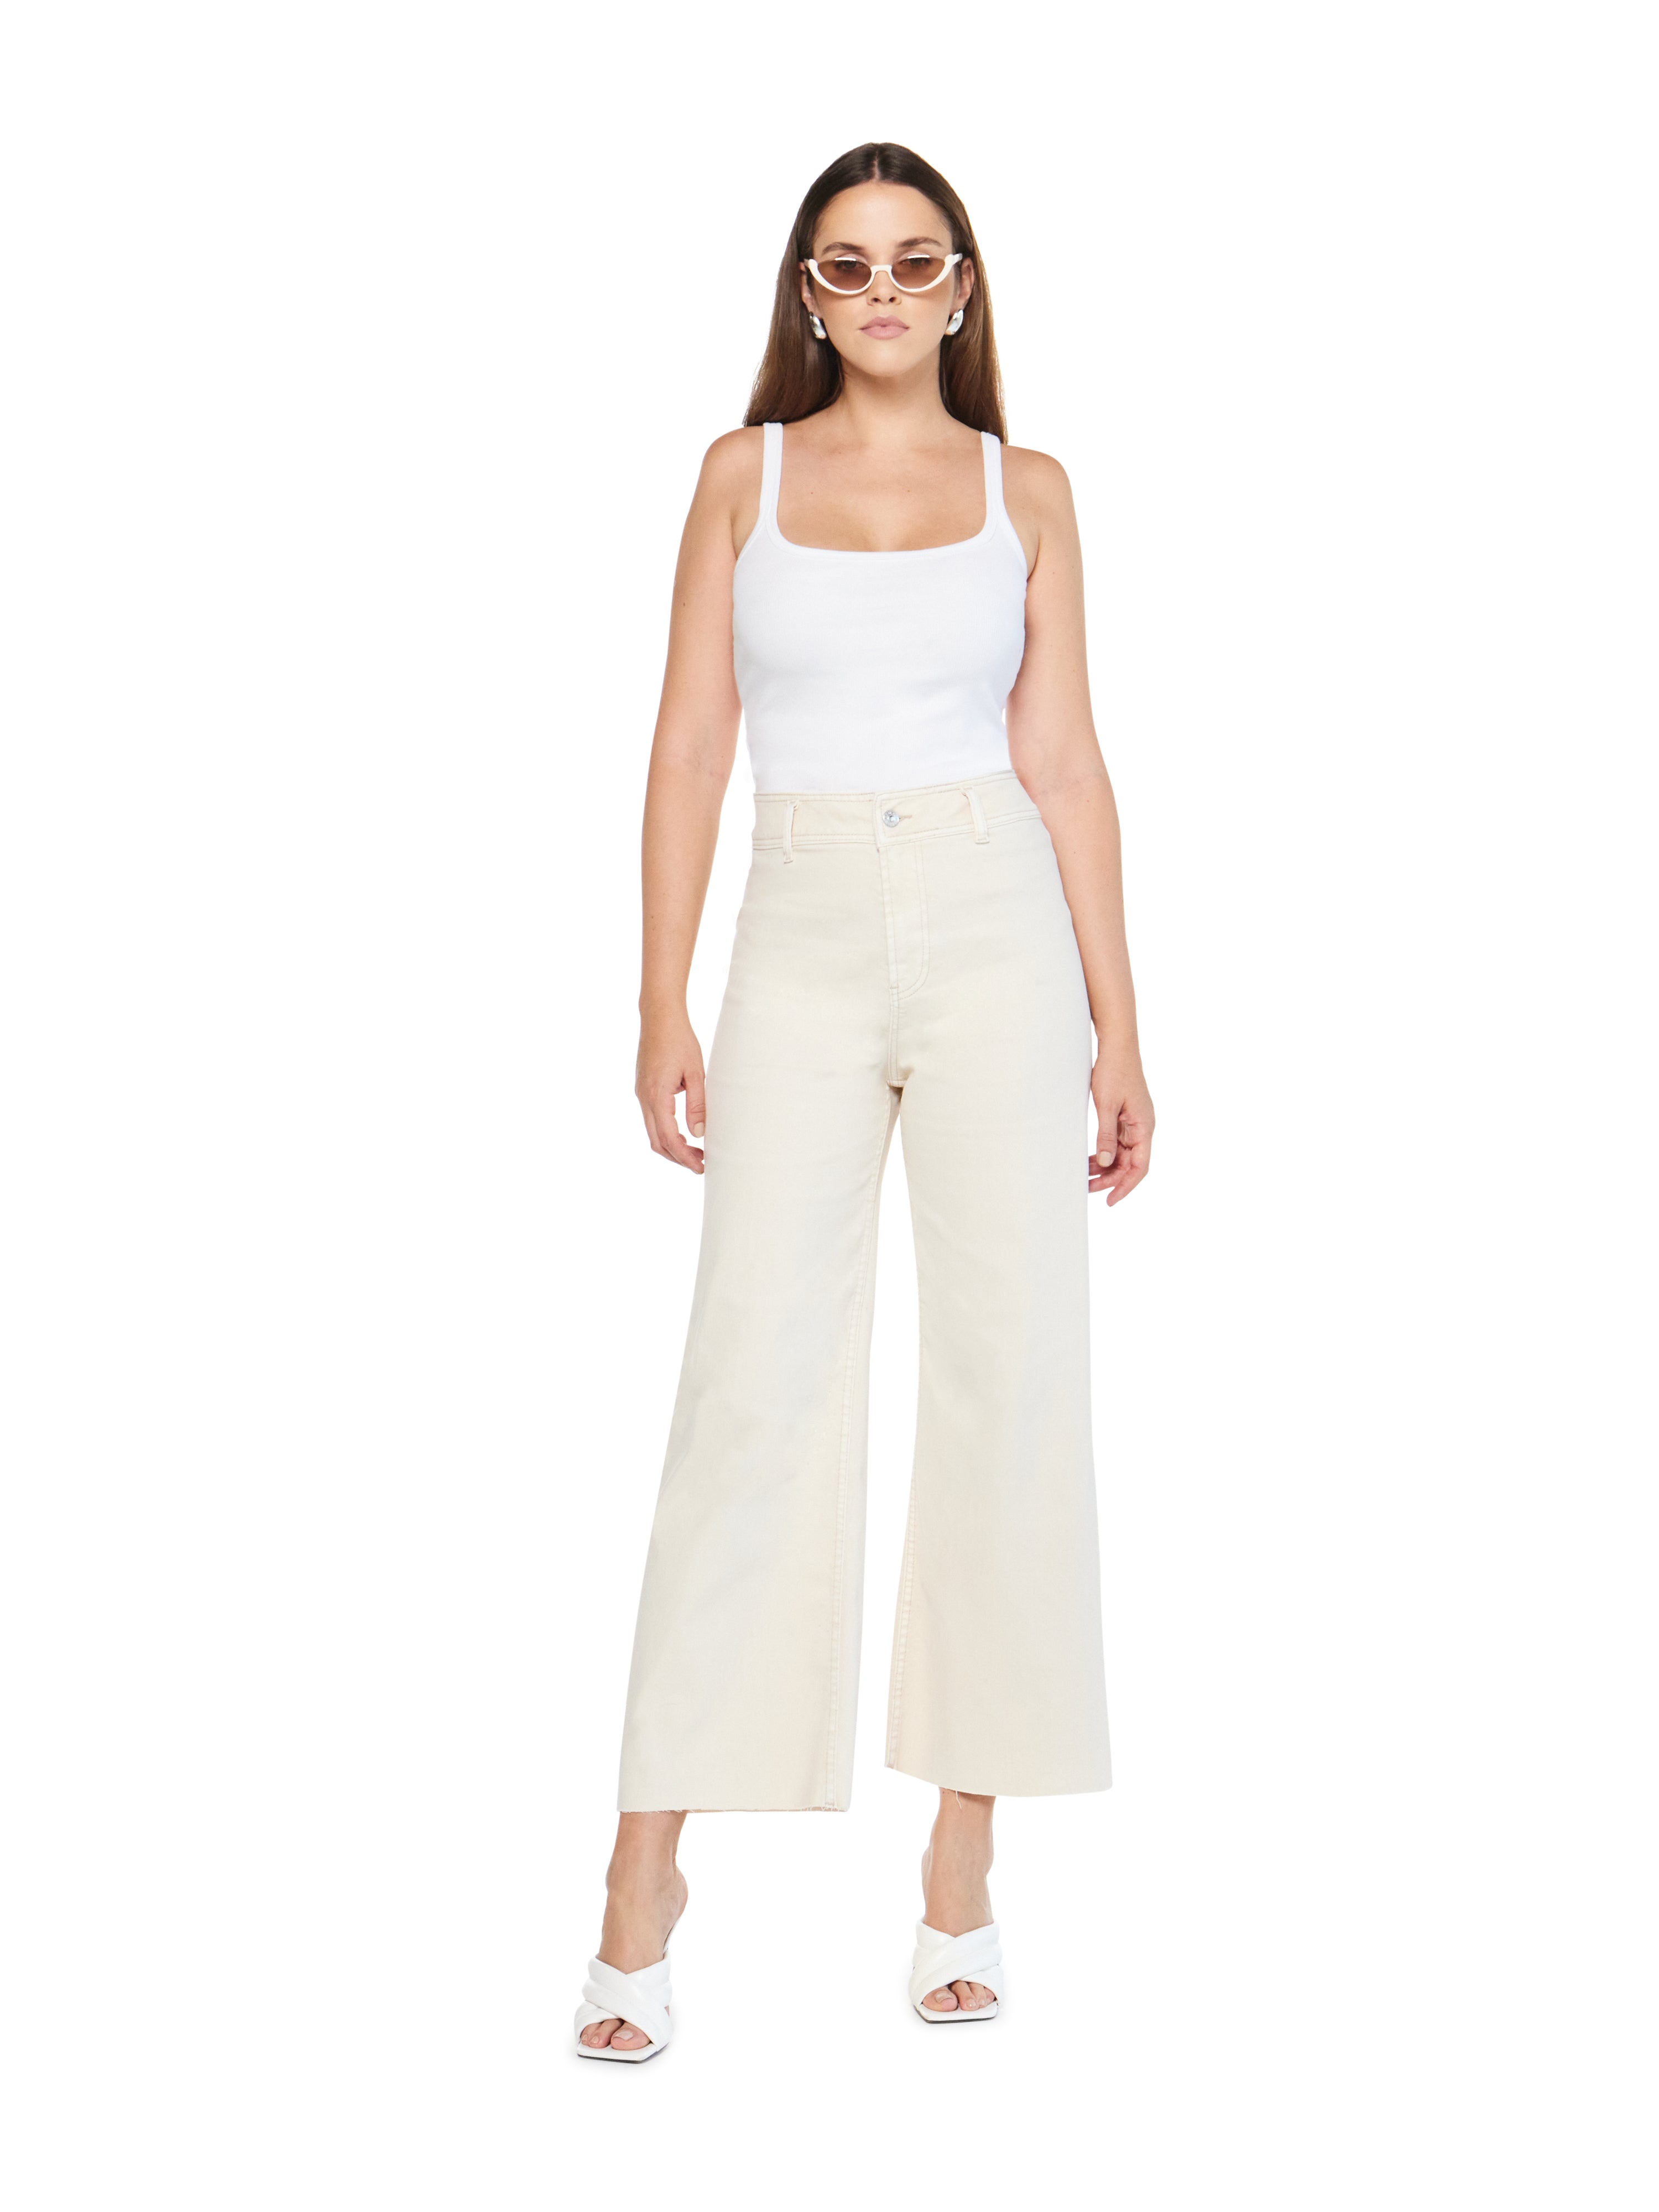 Articles of Society: Carine High Rise Relaxed Jean, Cream